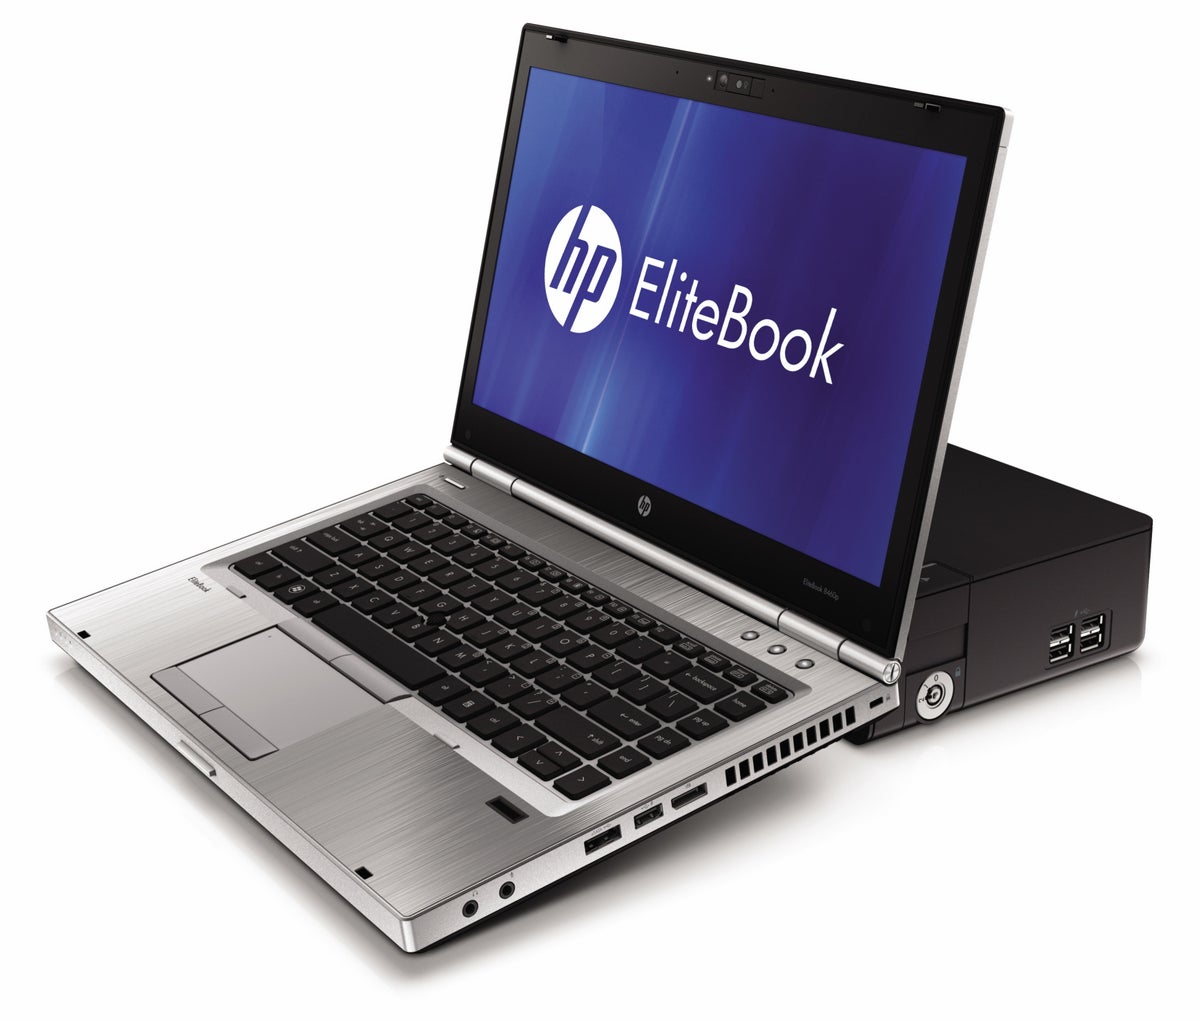 HP_EliteBook_p-series_front_right_view_with_dock.JPG